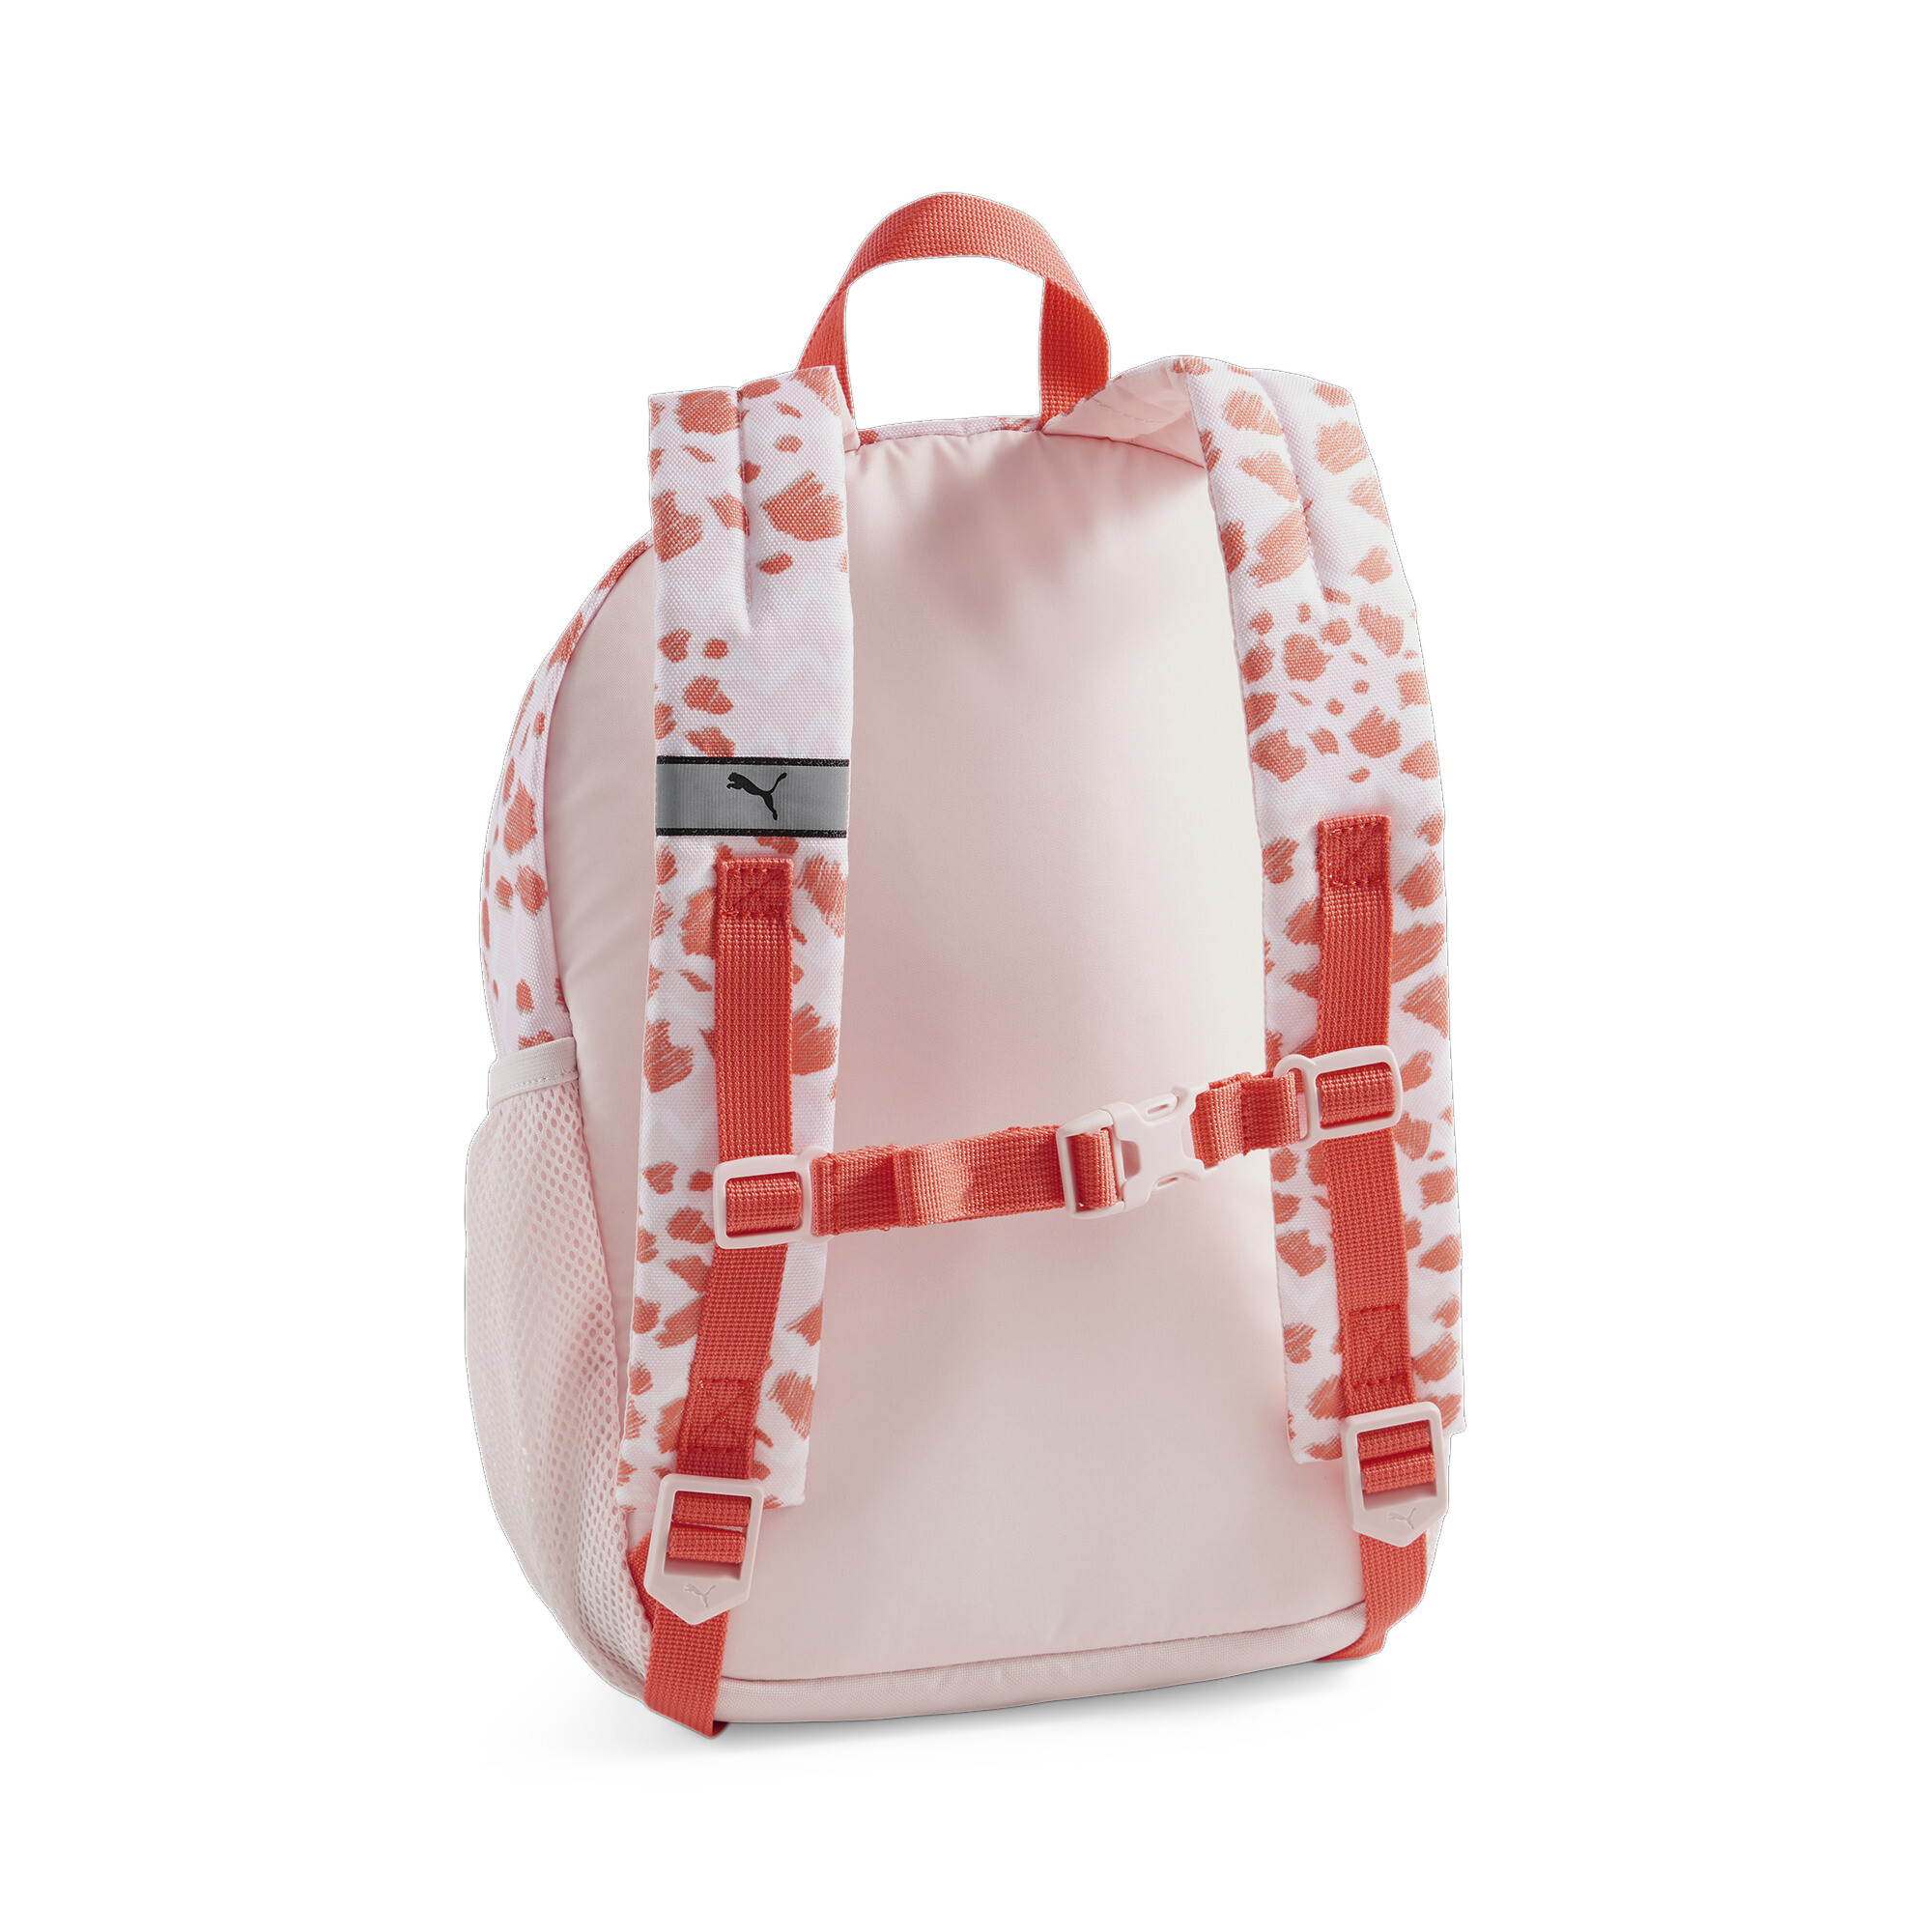 Puma Mixmatch Youth Backpack, Pink, Accessories